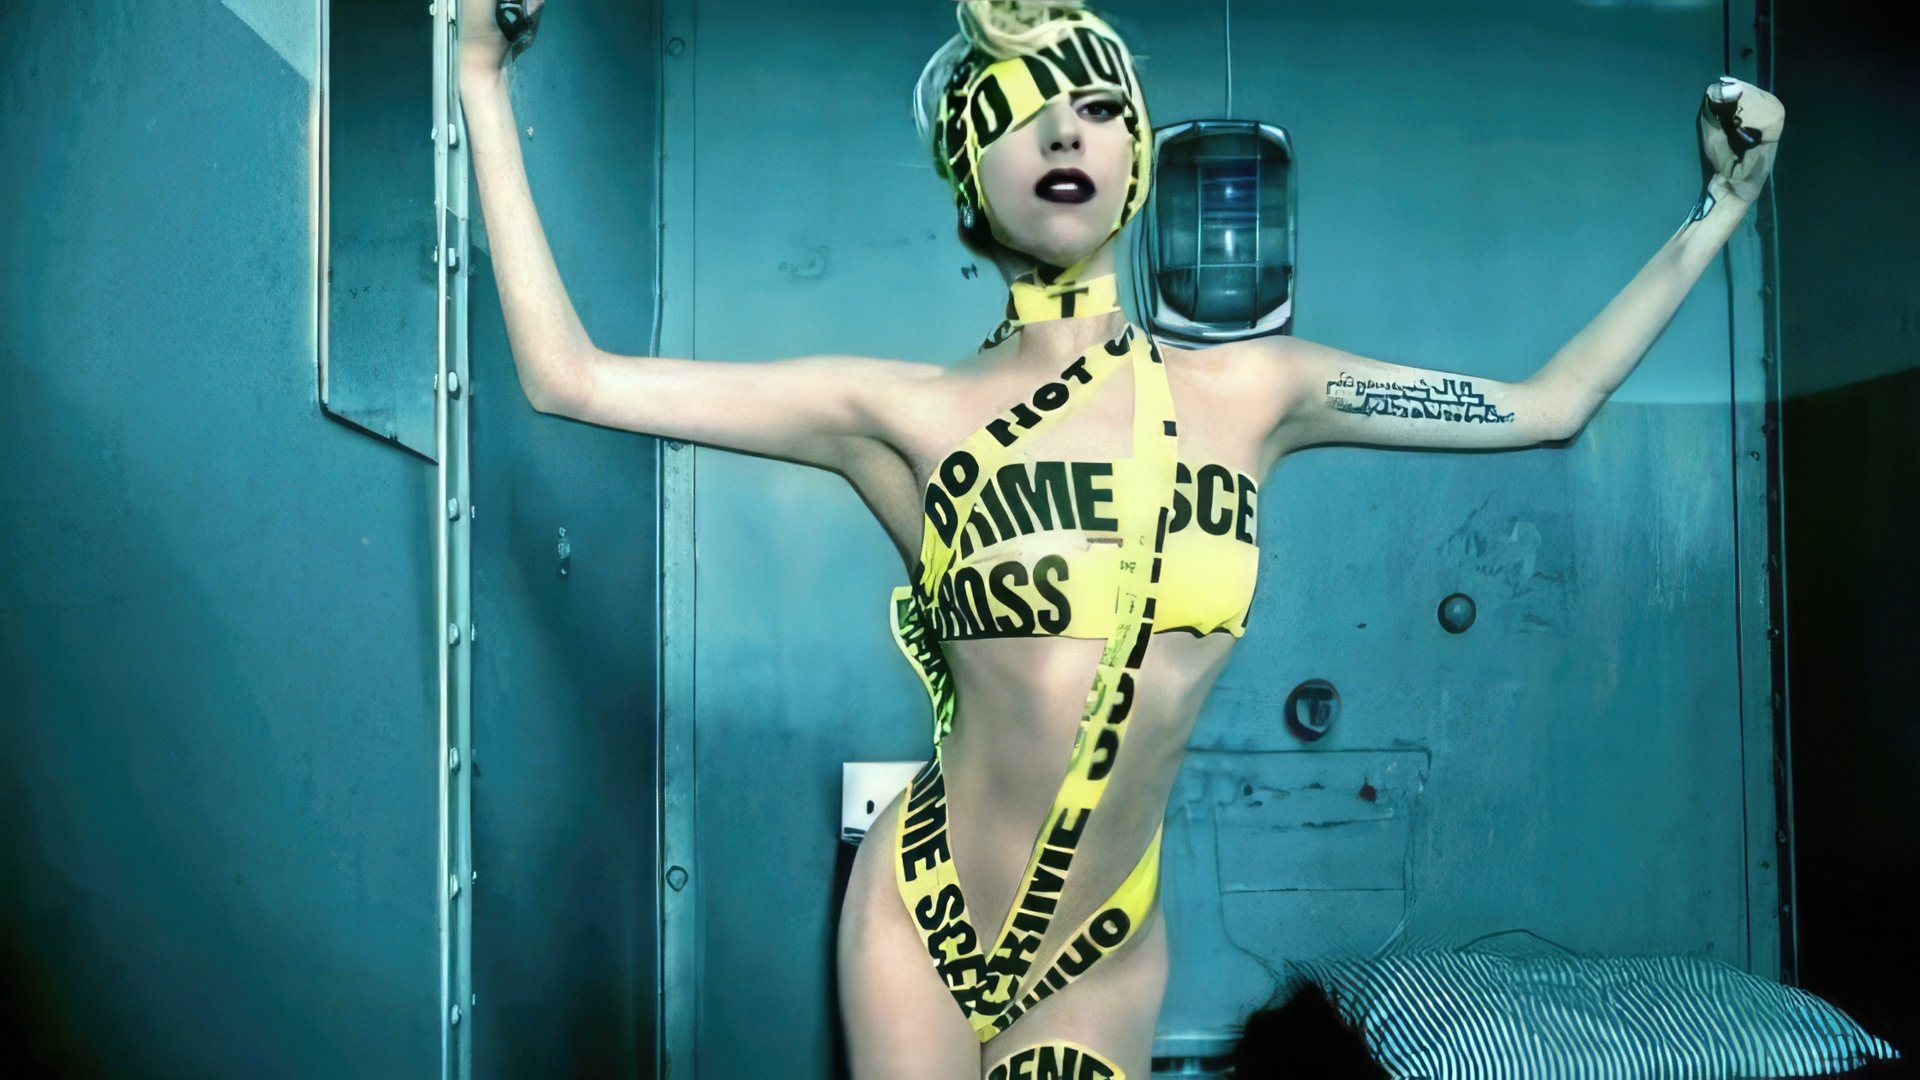 A scene from Lady Gaga’s video Telephone